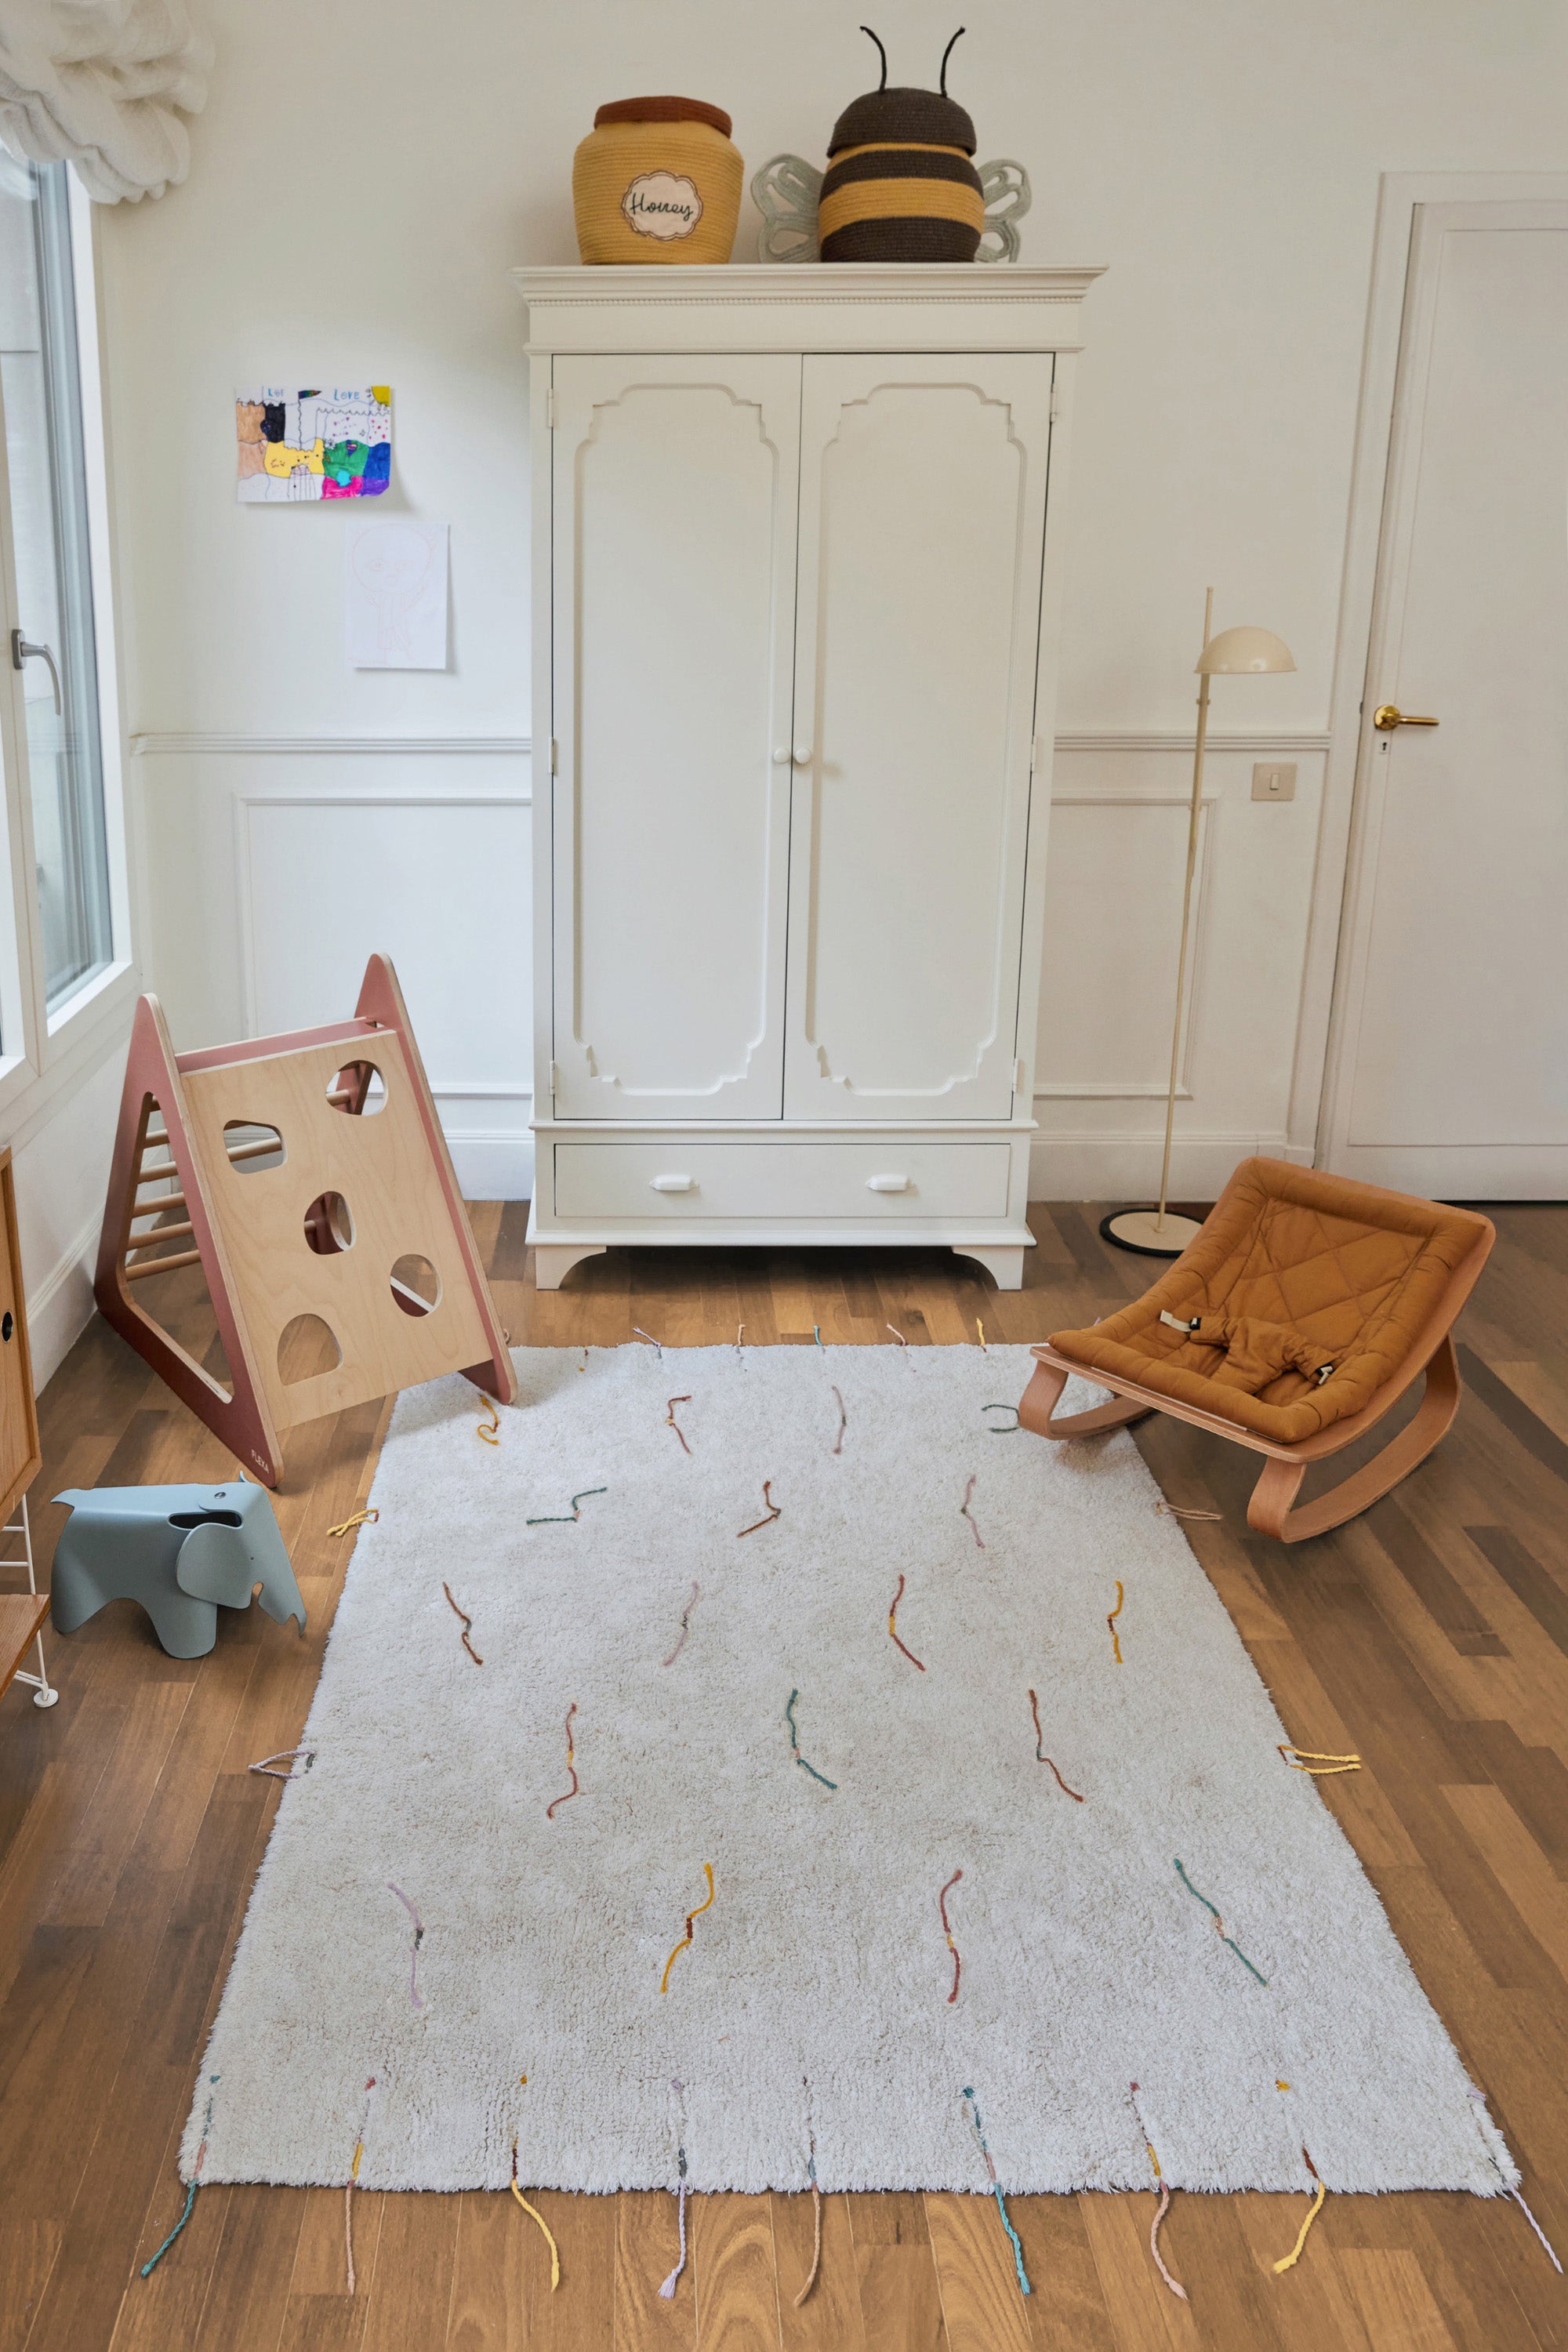 Plain cream rug with multicolour lined pattern and added wildflower toys